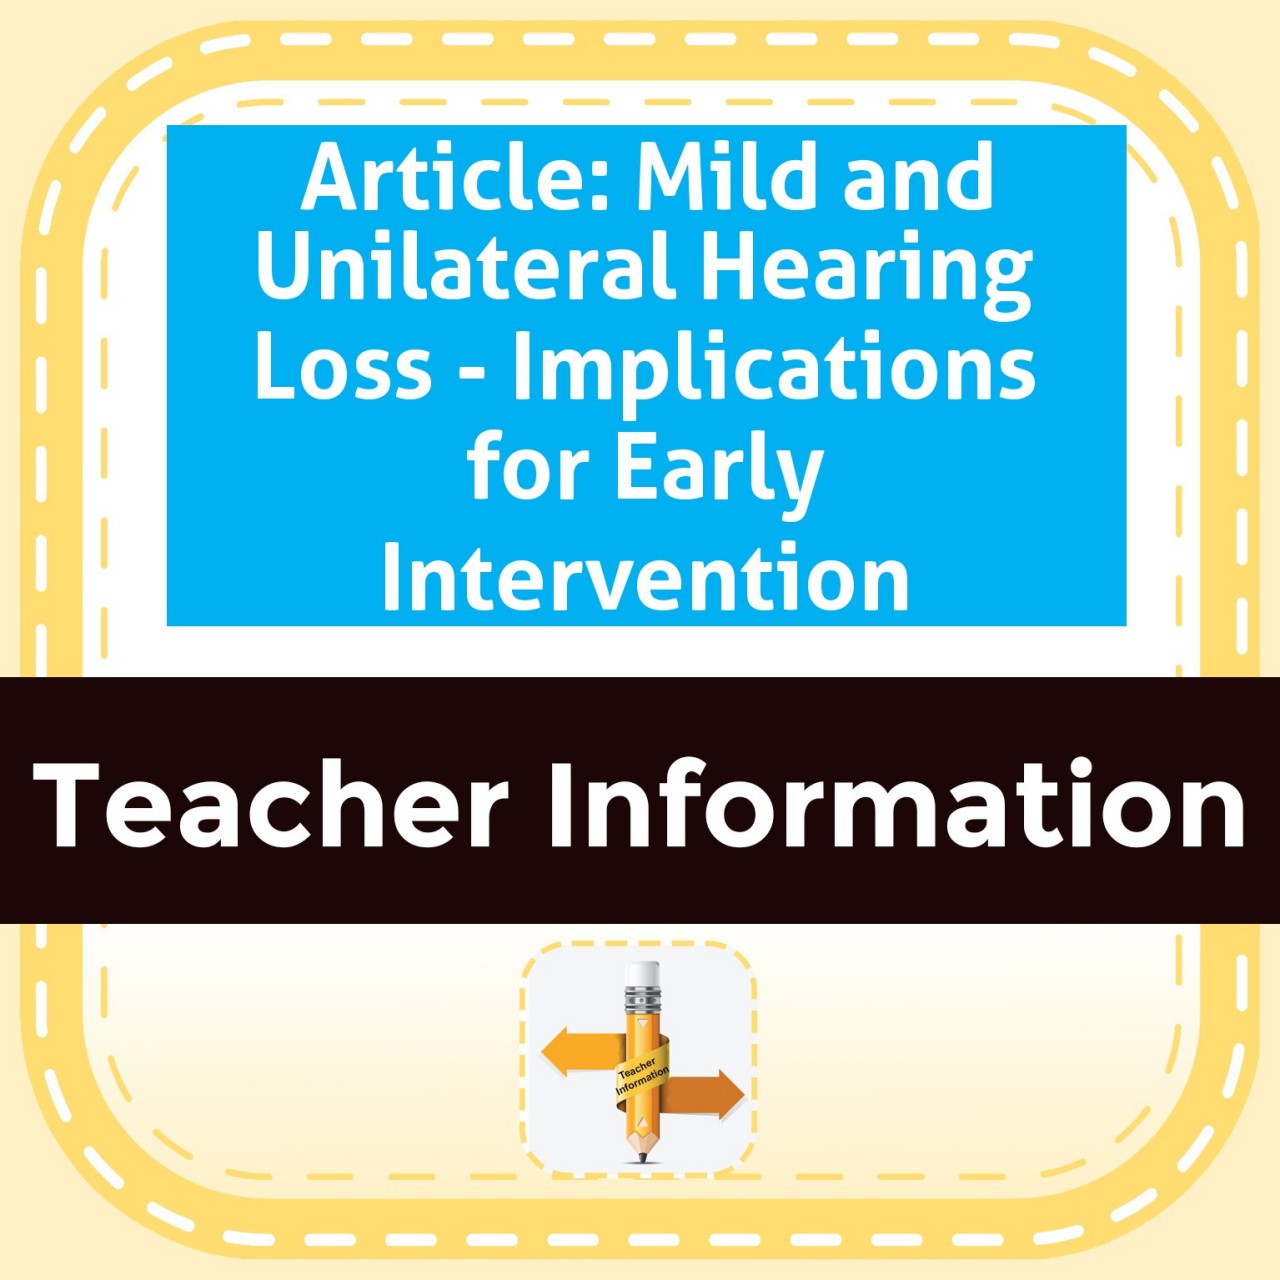 Article: Mild and Unilateral Hearing Loss - Implications for Early Intervention